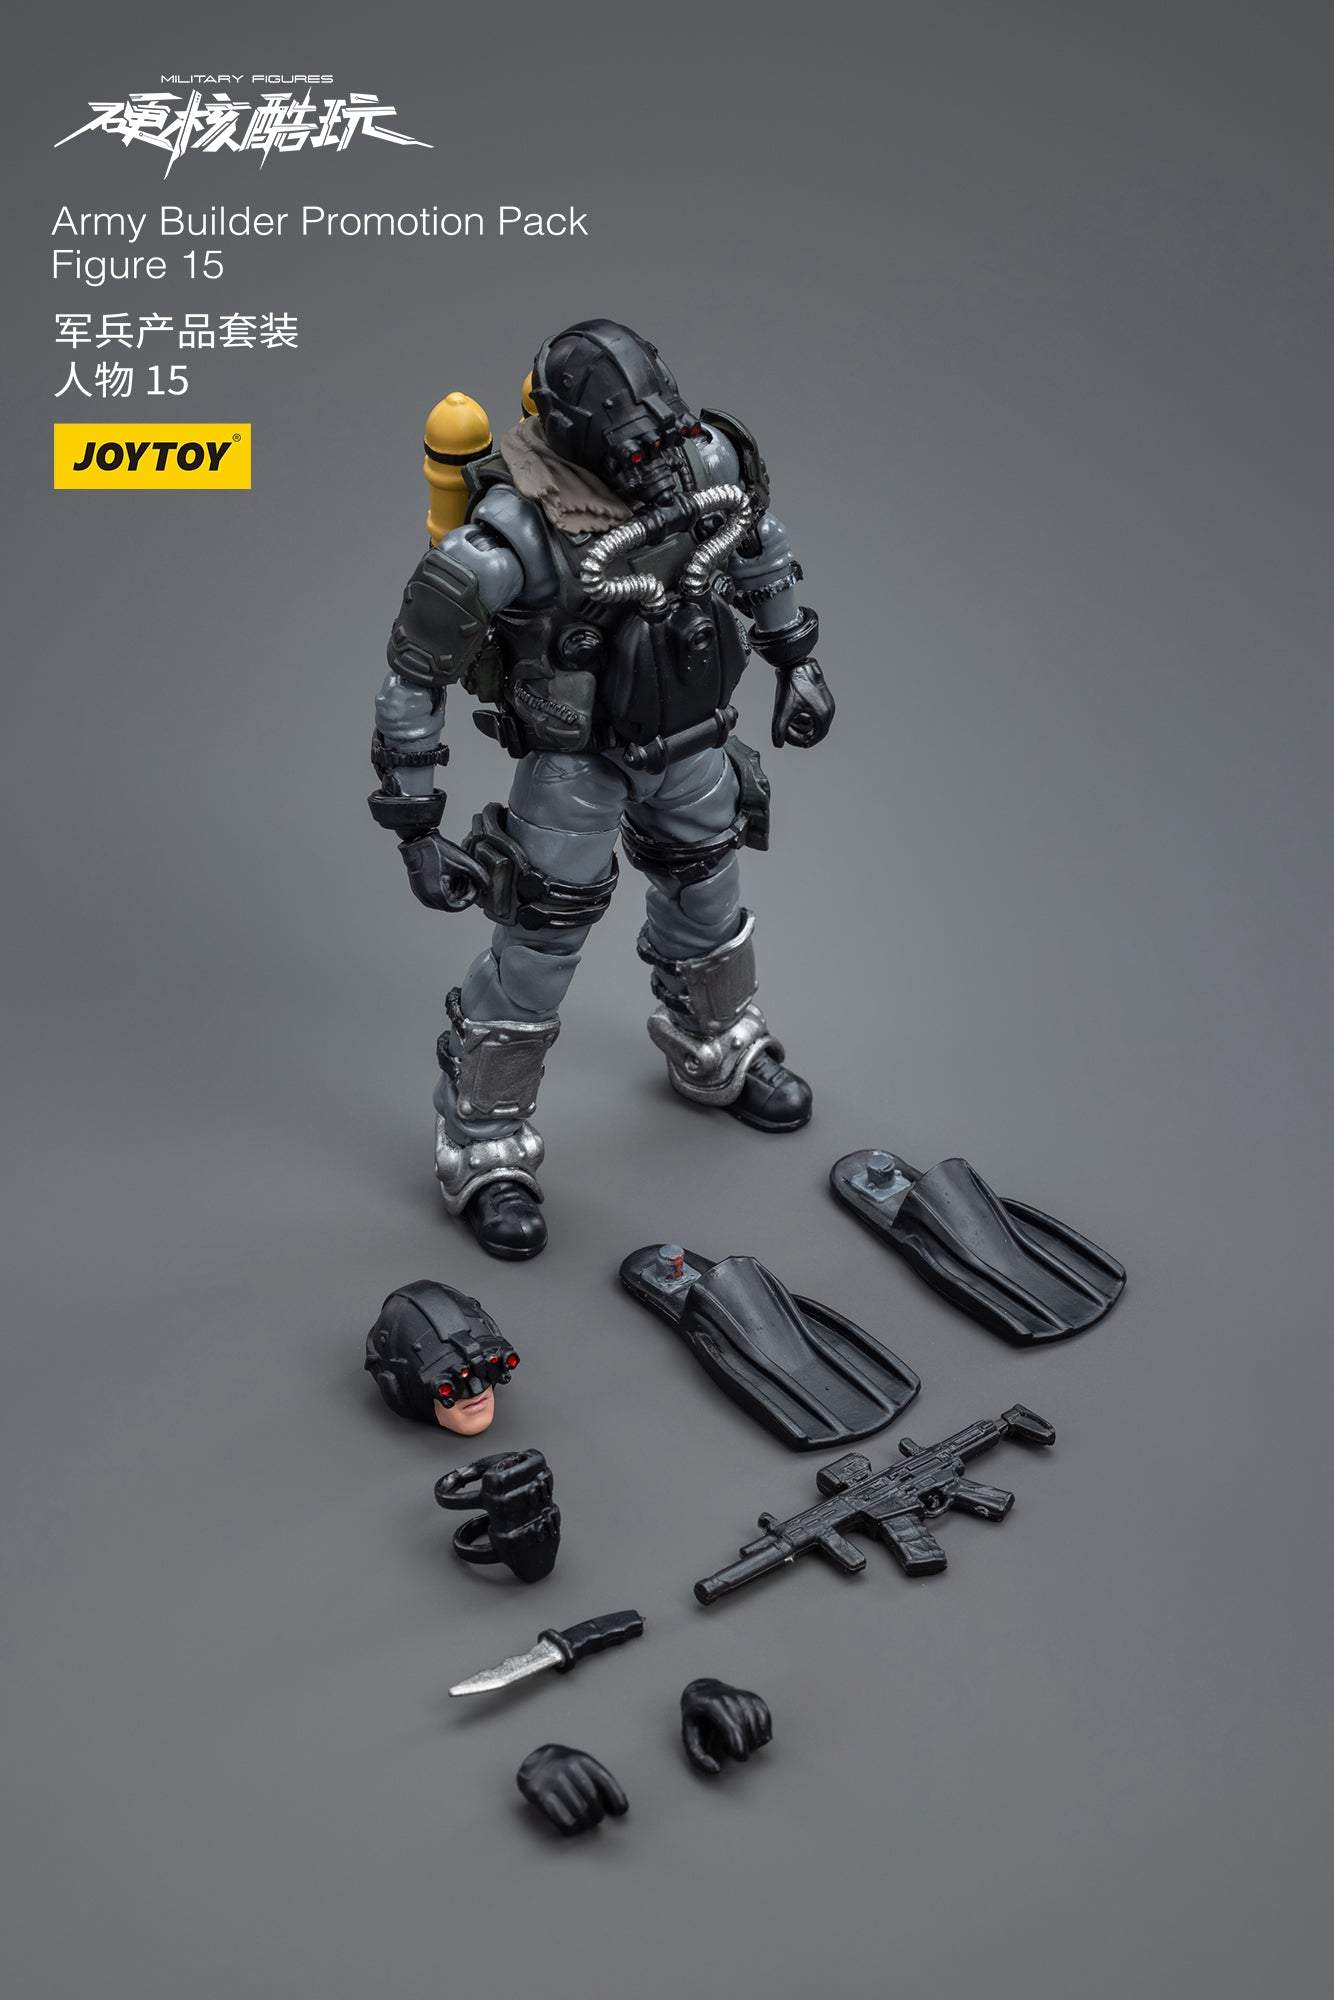 Army Builder Promotion Pack Figure 15